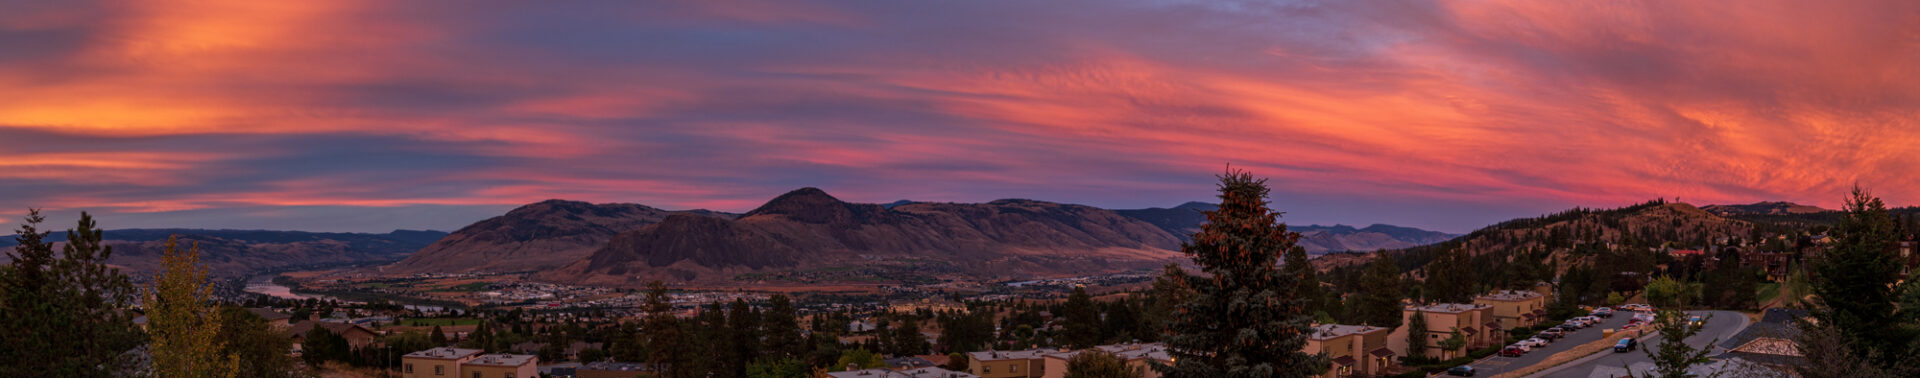 Kamloops City panoramic view of sunset with mountain and city